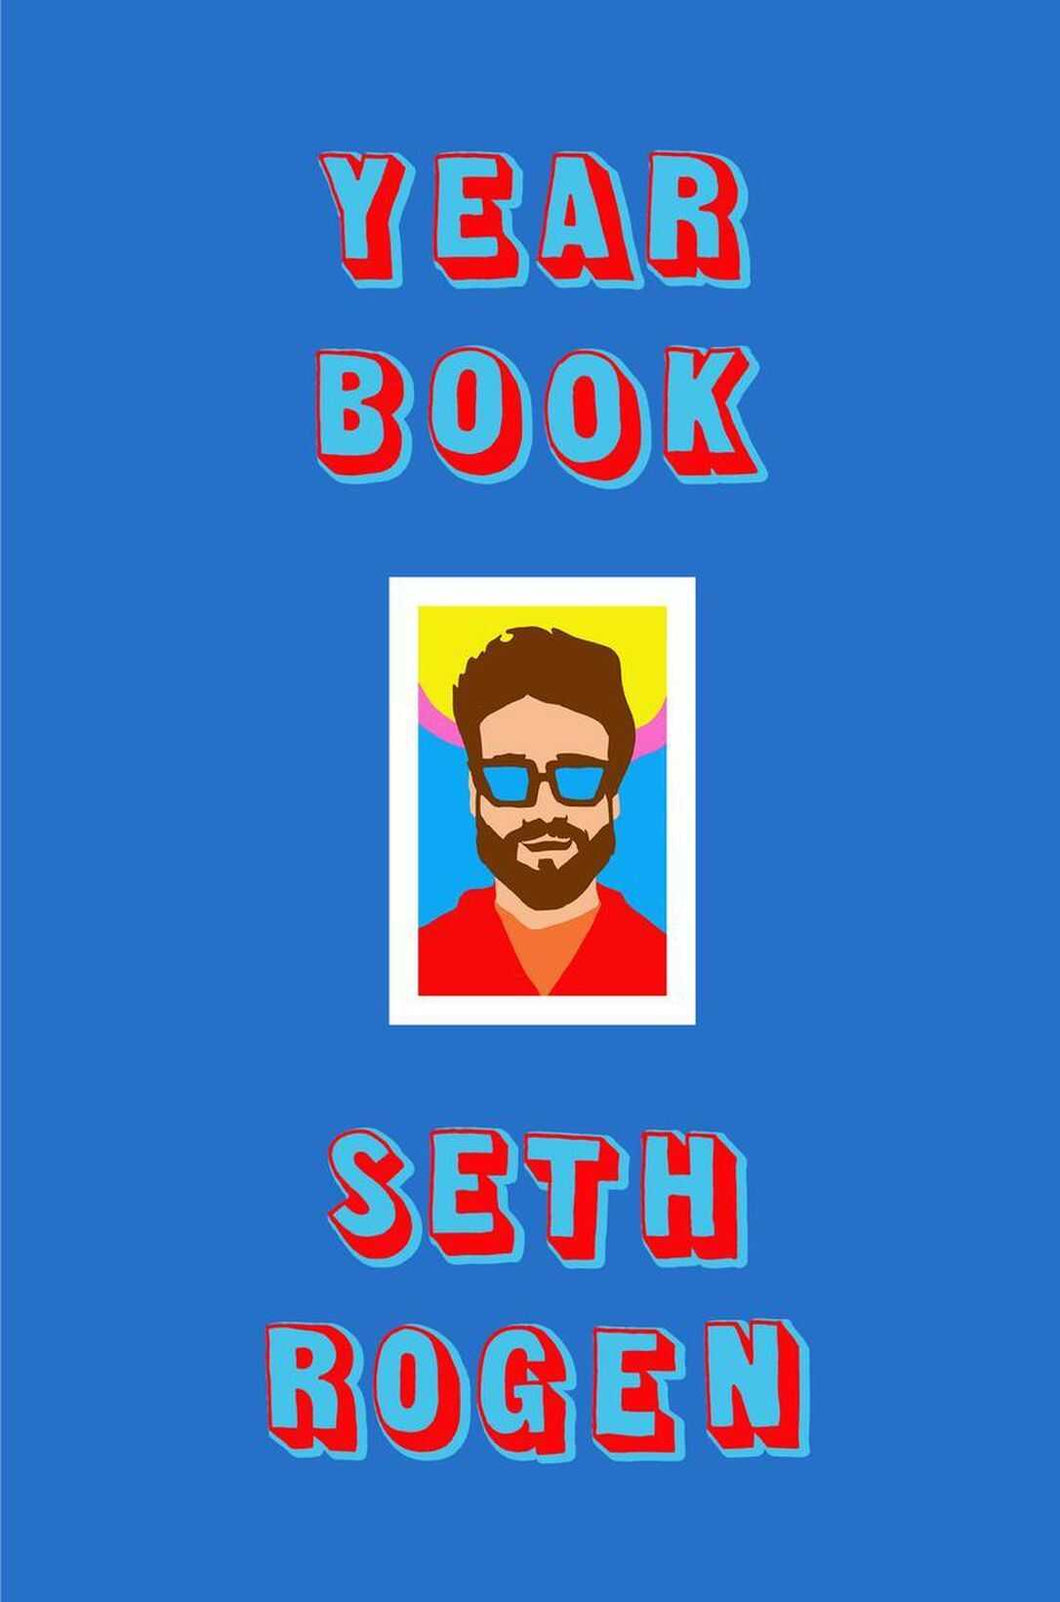 Yearbook by Seth Rogen / Hardcover - NEW BOOK OR BOOK BOX